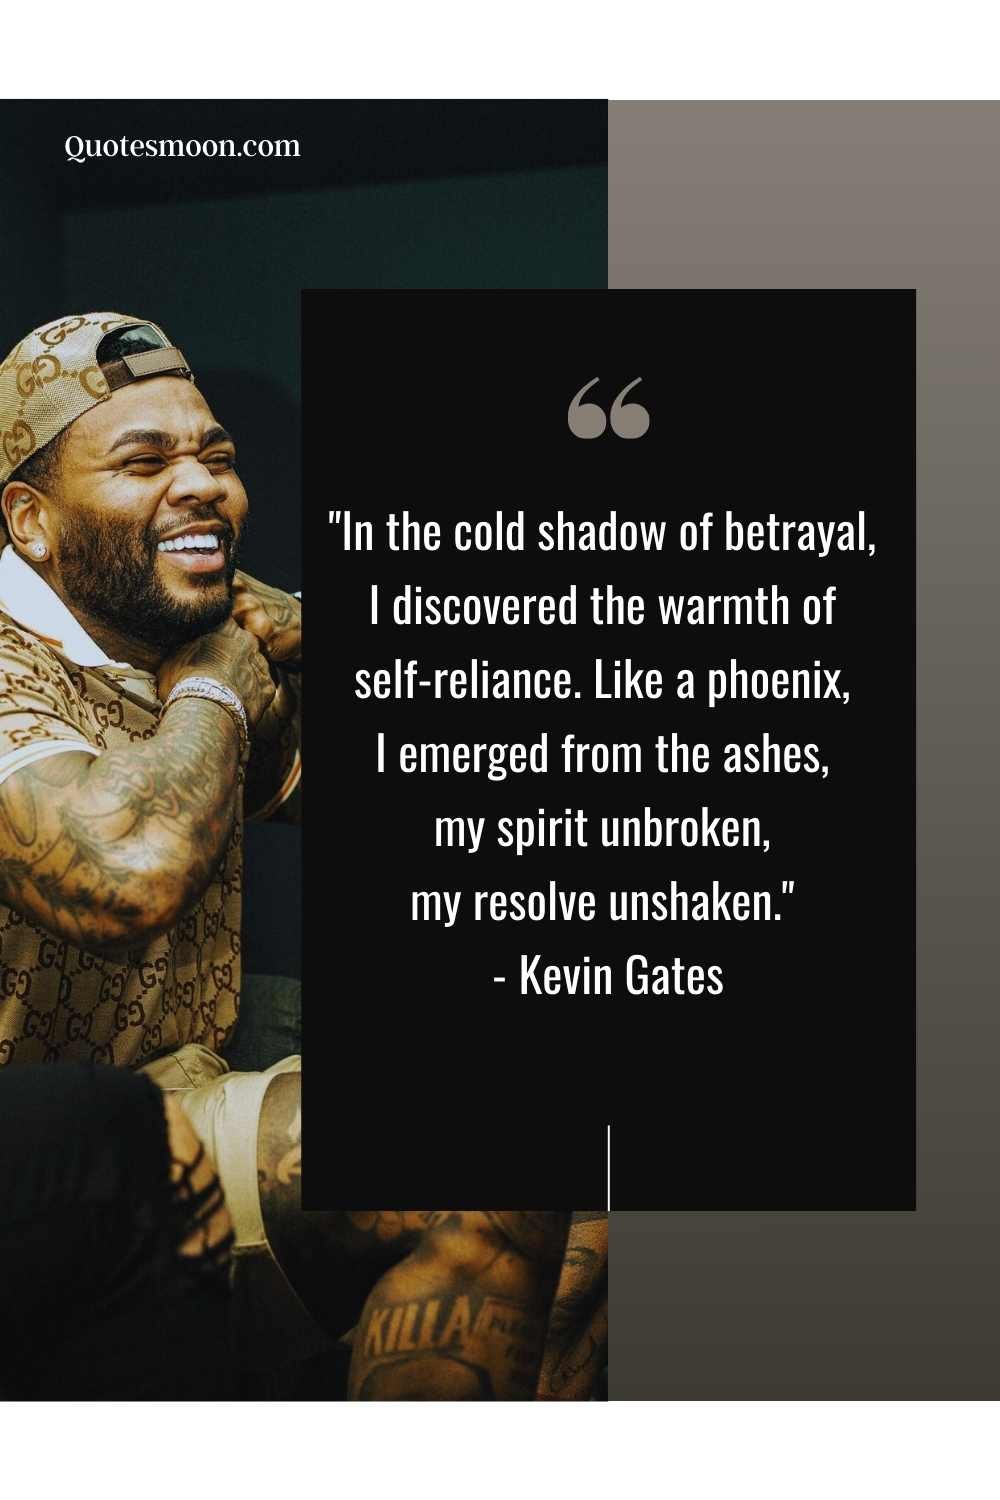 Kevin Gates Famous Quotes On Love with images HD